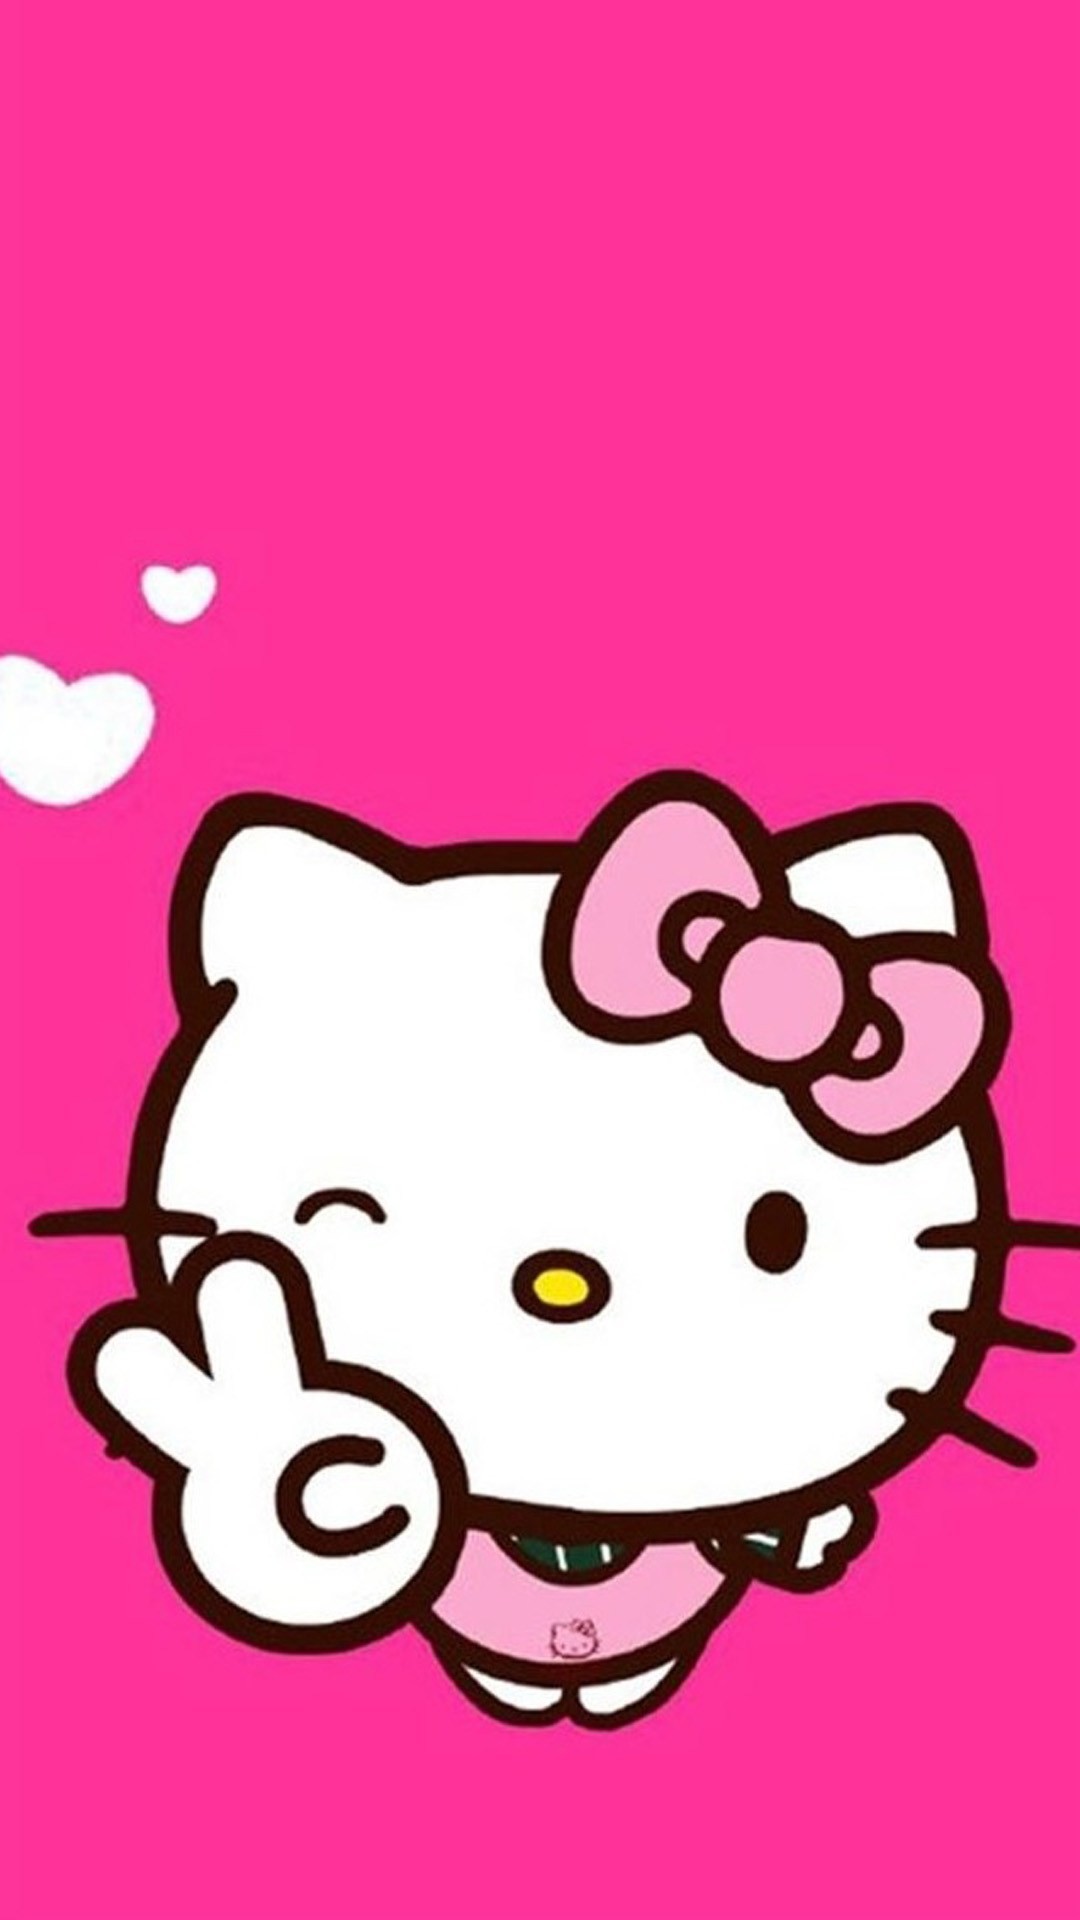 1080x1920 Cute wallpaper for Whatsapp featuring Hello Kitty in pink.